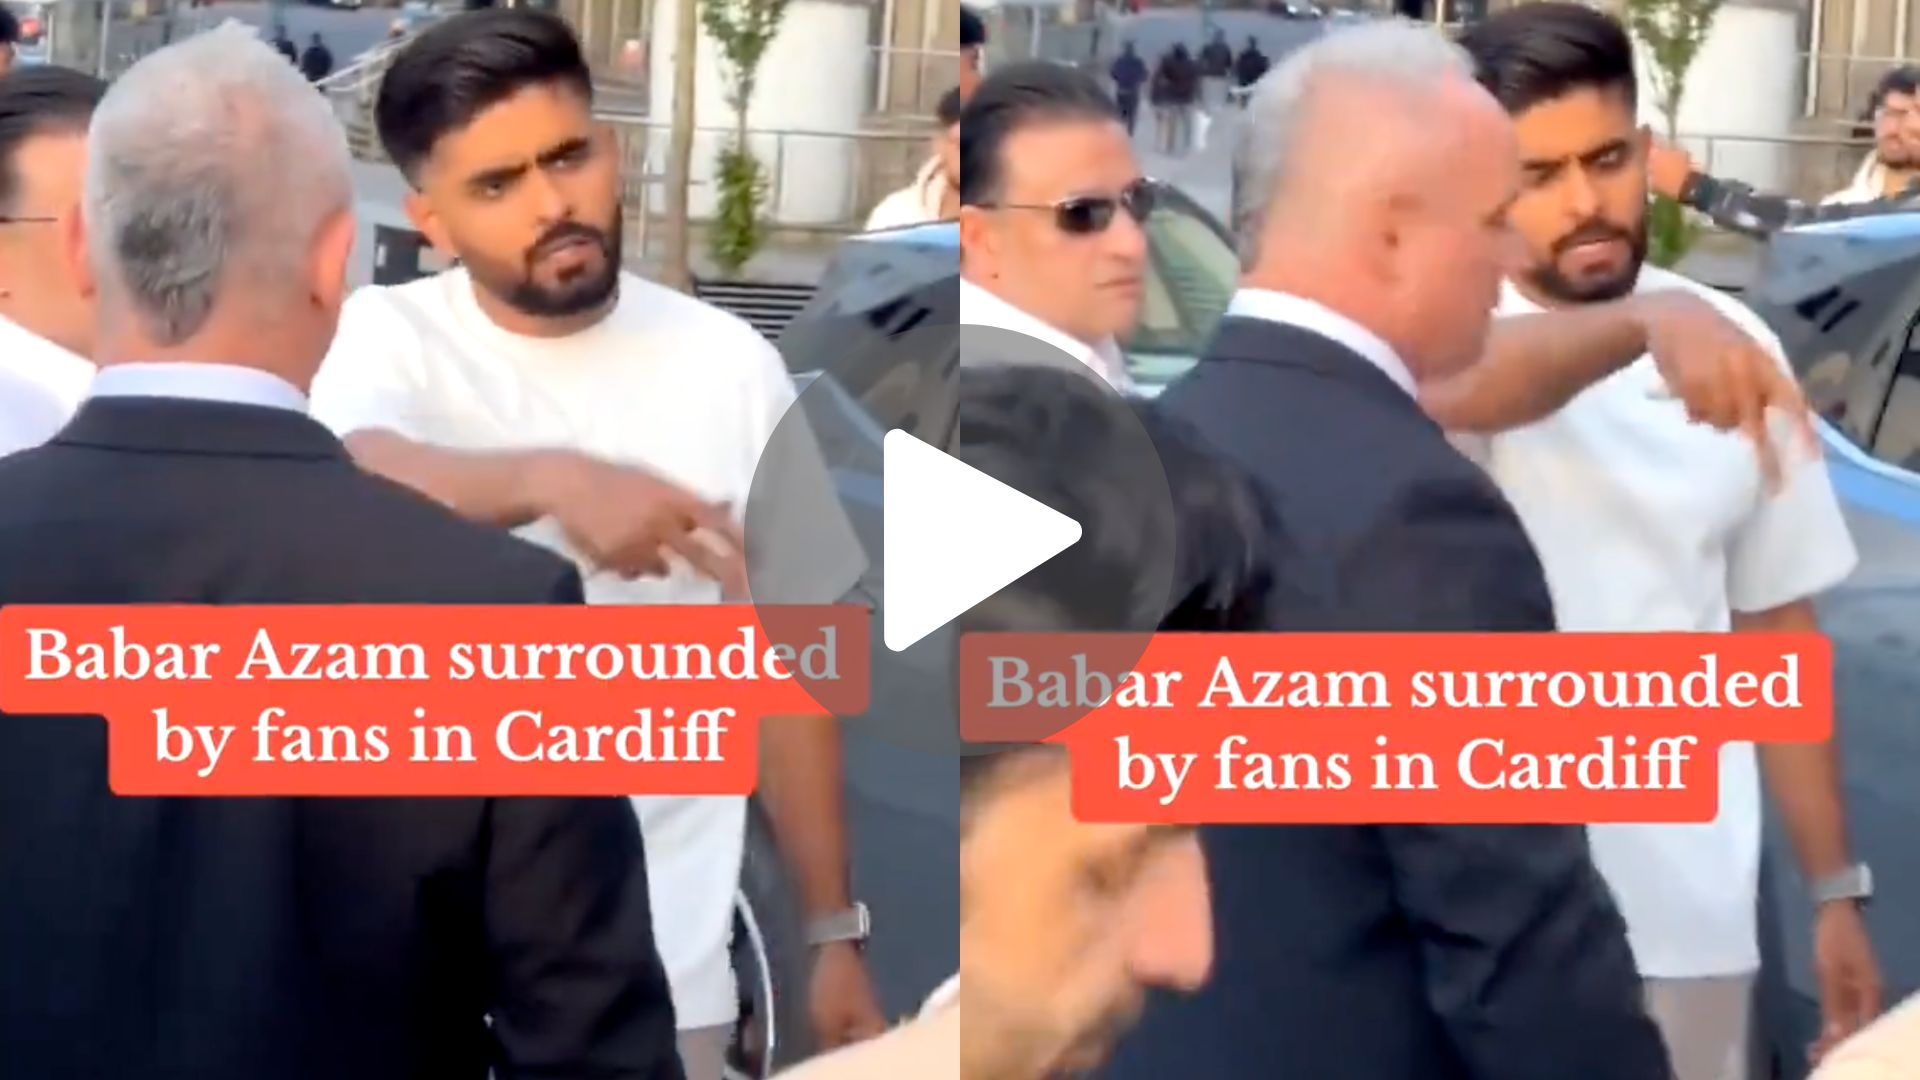 [Watch] 'Upar Mat Chadho,' Furious Babar Azam Scolds Fans As They Mob Him In Cardiff